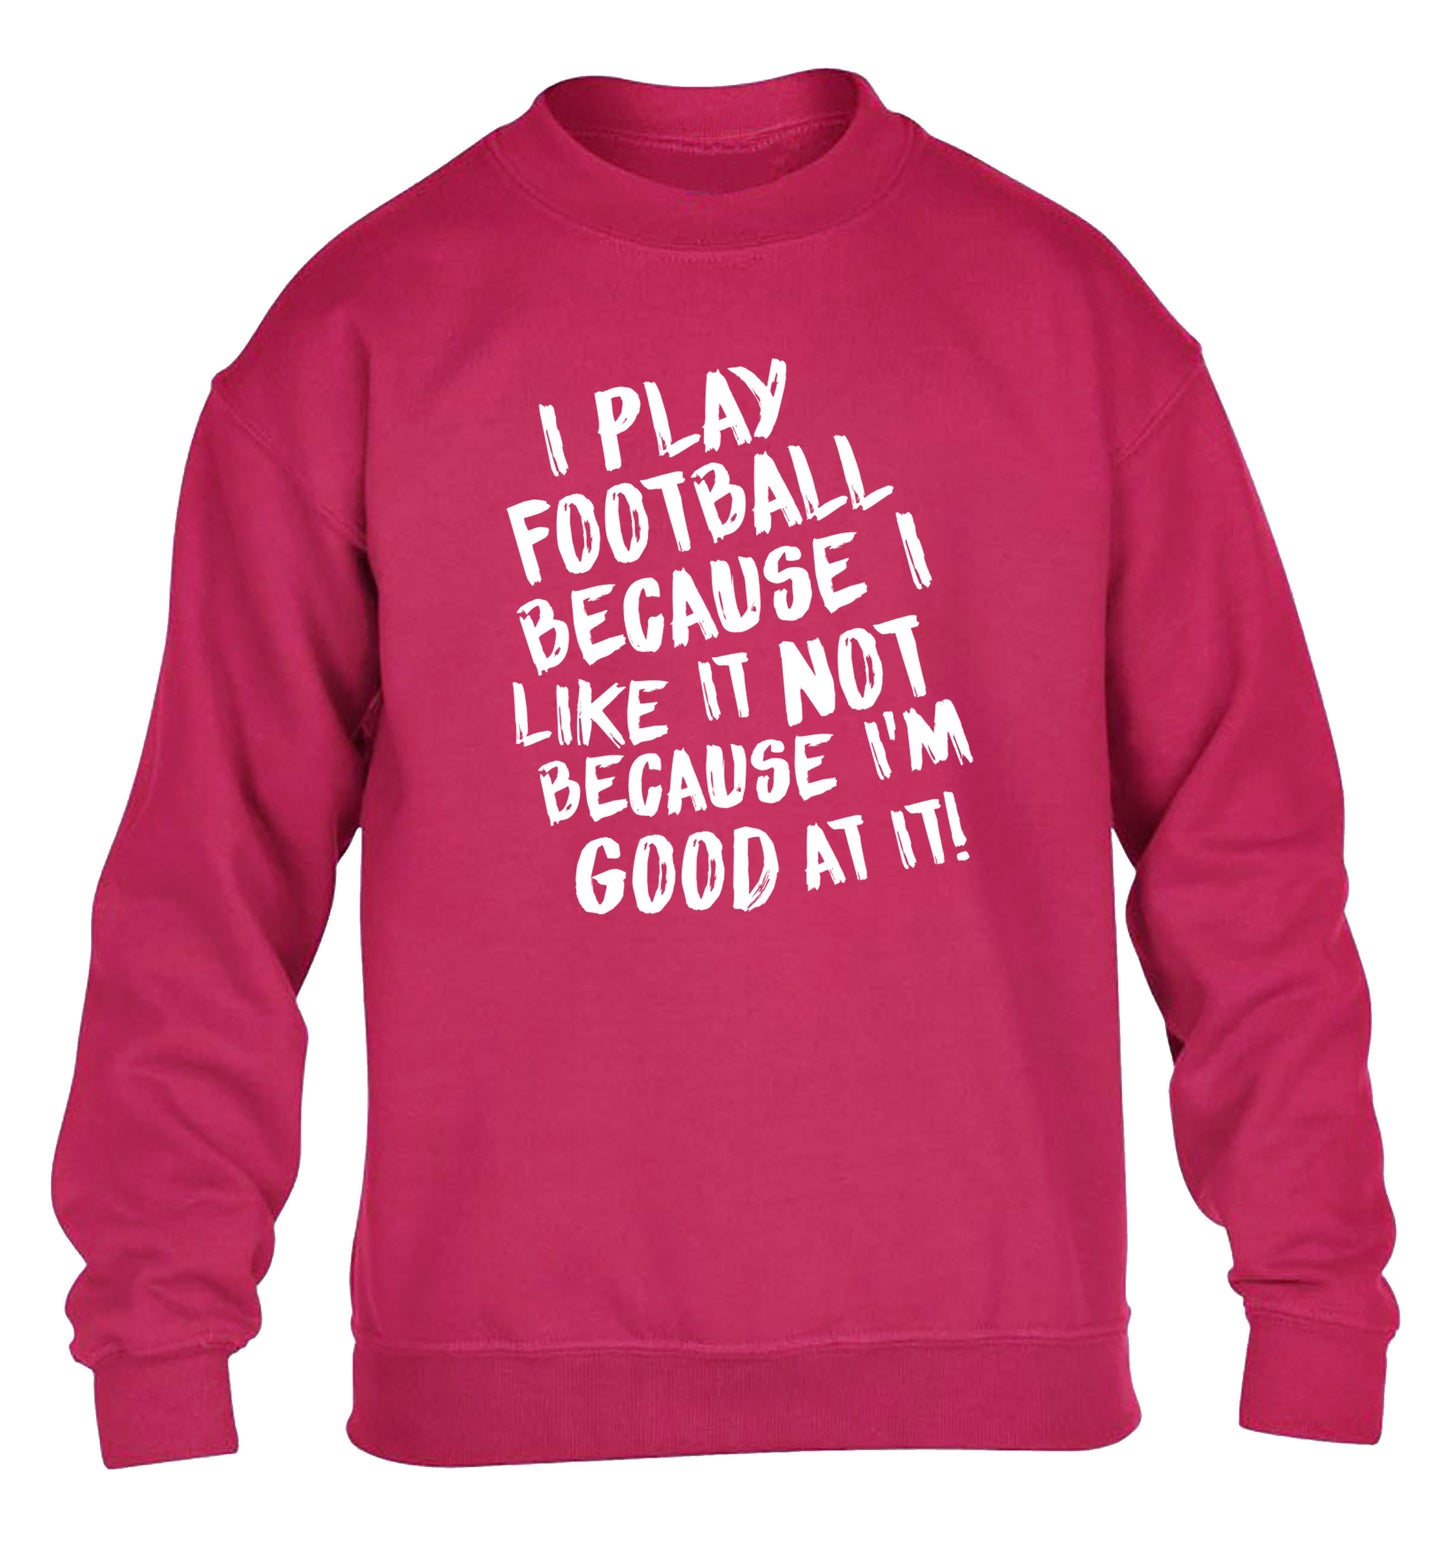 I play football because I like it not because I'm good at it children's pink sweater 12-14 Years